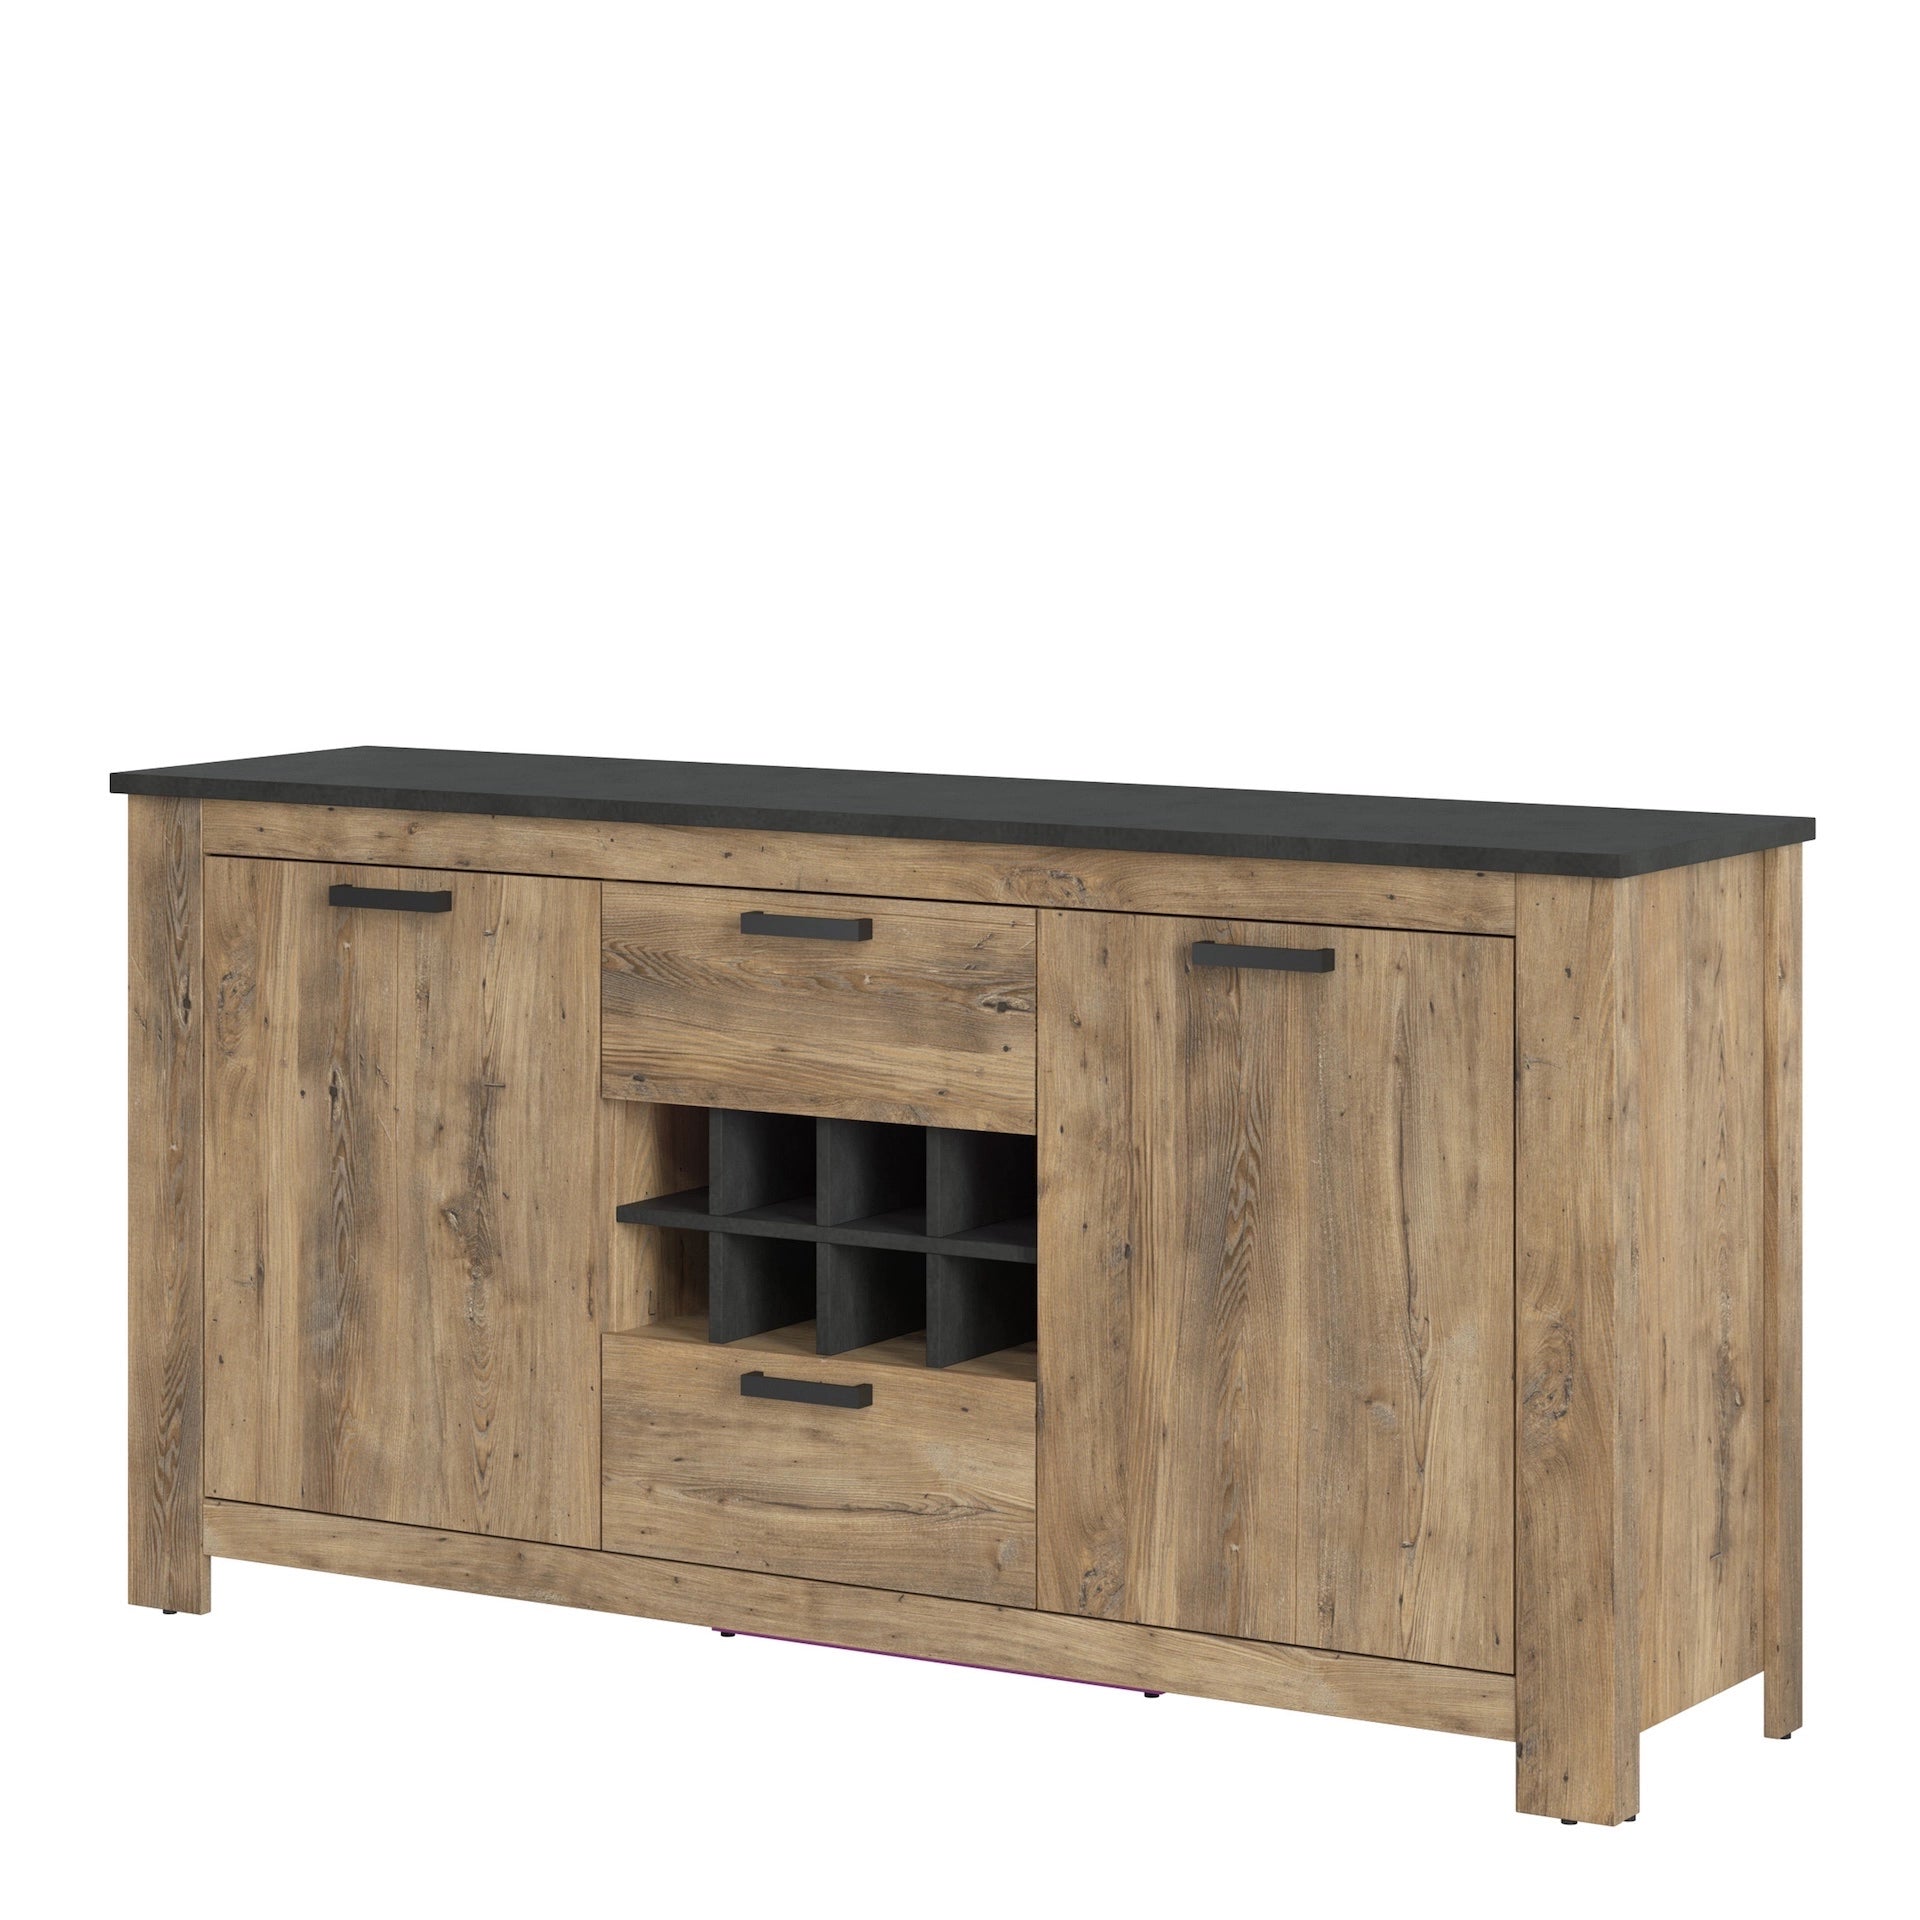 Furniture To Go Rapallo 2 Door 2 Drawer Sideboard with Wine Rack in Chestnut & Matera Grey